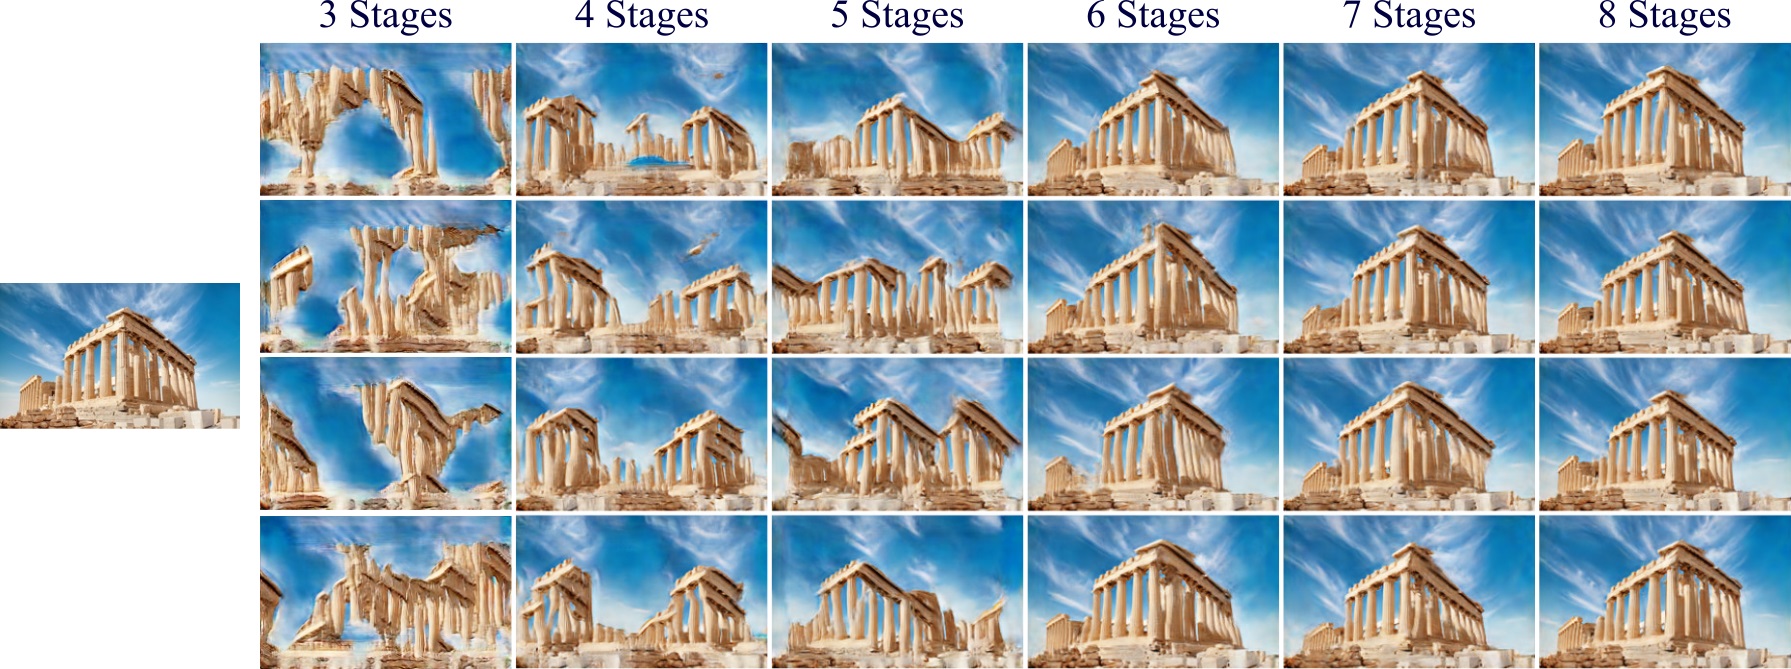 Trained Stages Visualization